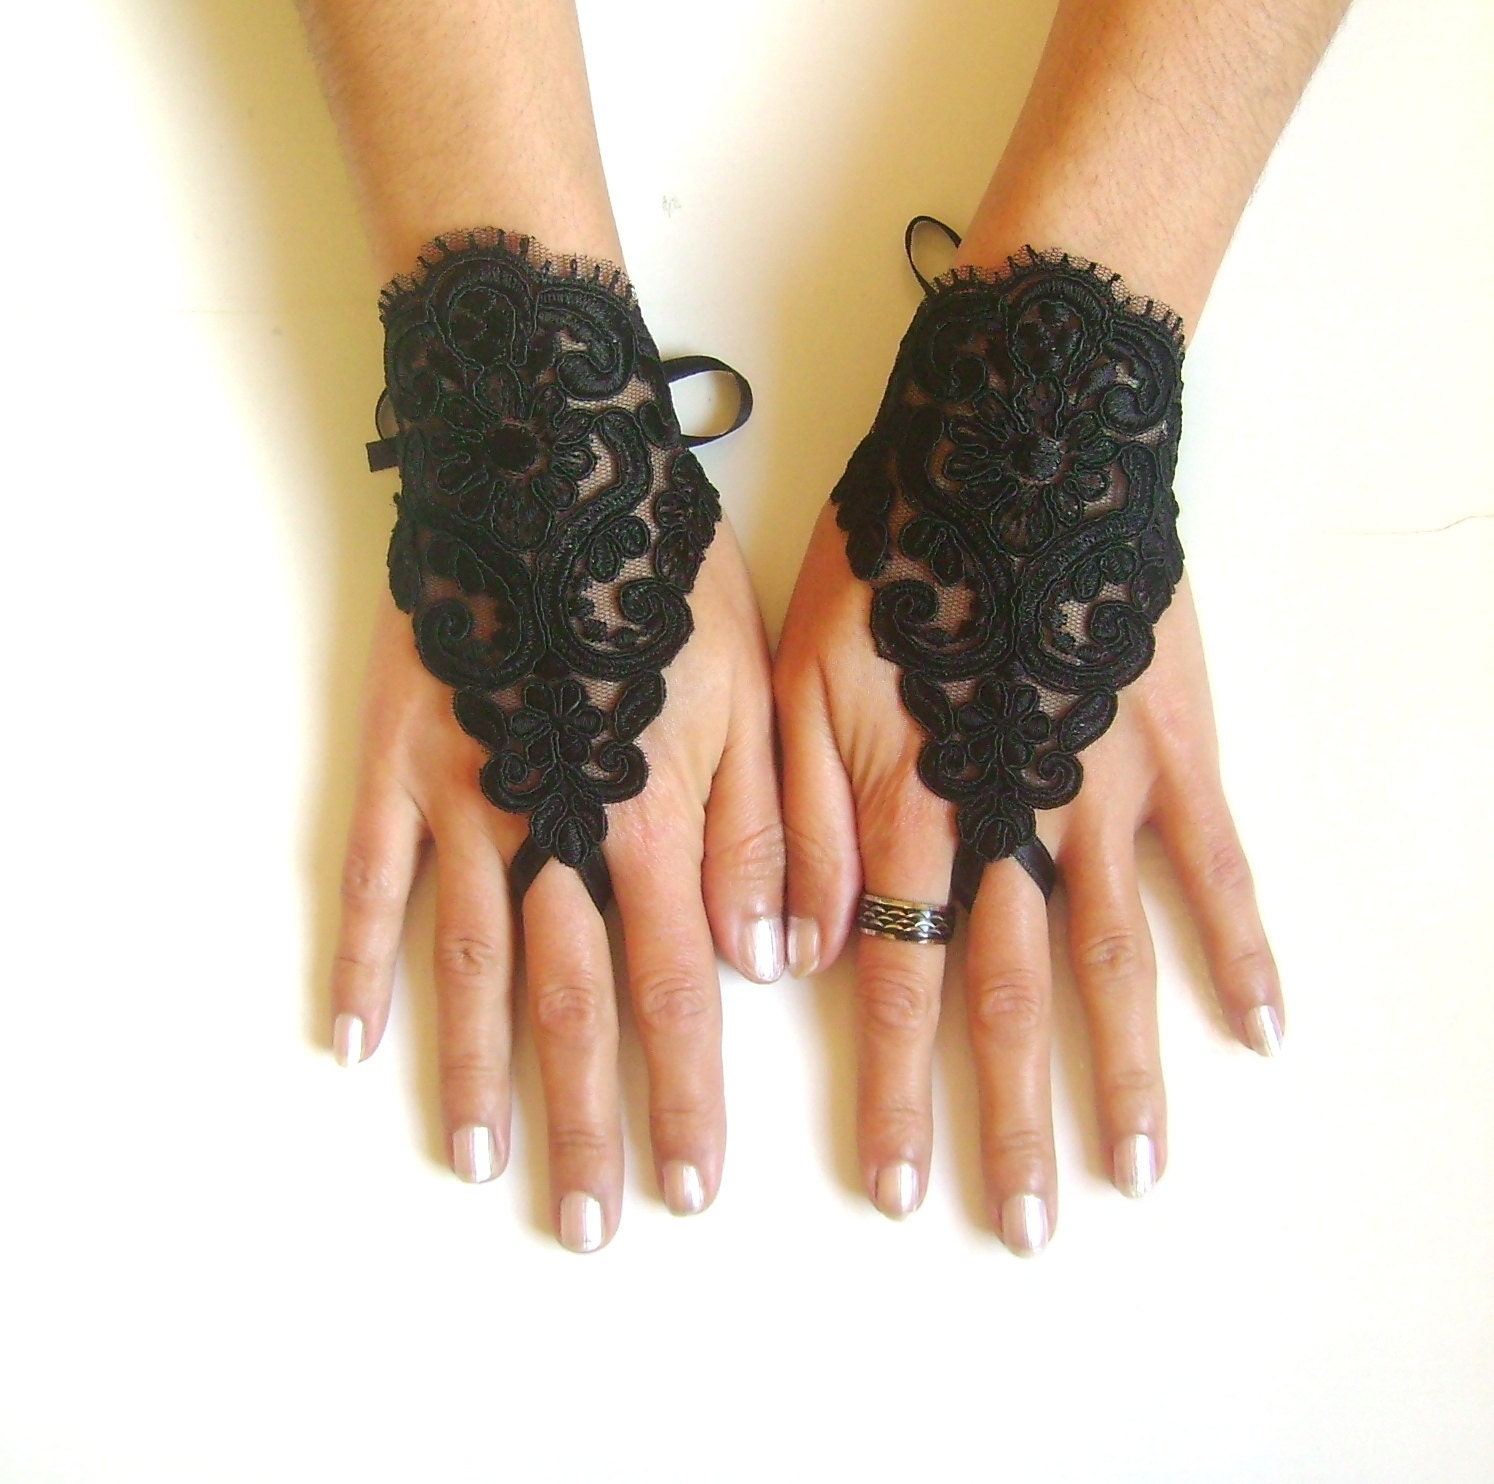 Frenc Lace glove free ship black warlock gothic prom party bridesmaid special occasion gift goth wedding lace Gypsy cuff lace tribal fusion